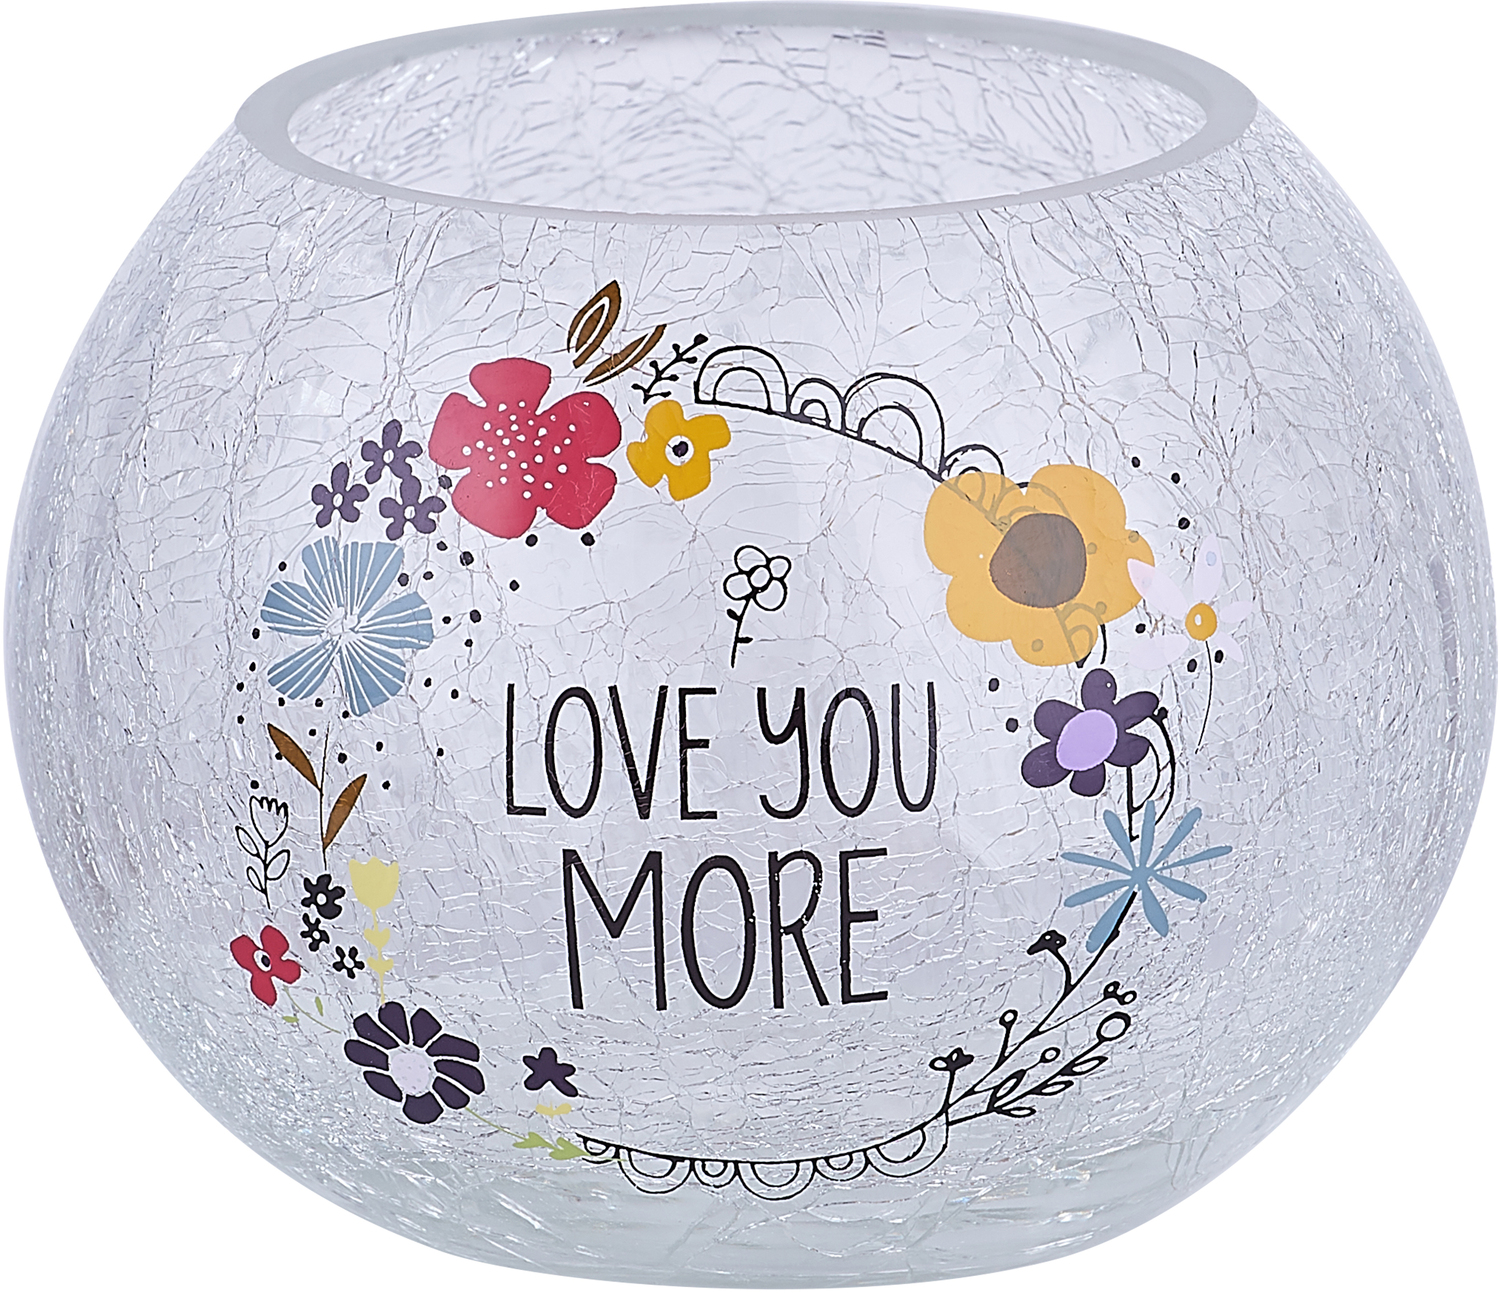 Love You by Love You More - Love You - 5" Crackled Glass Votive Holder